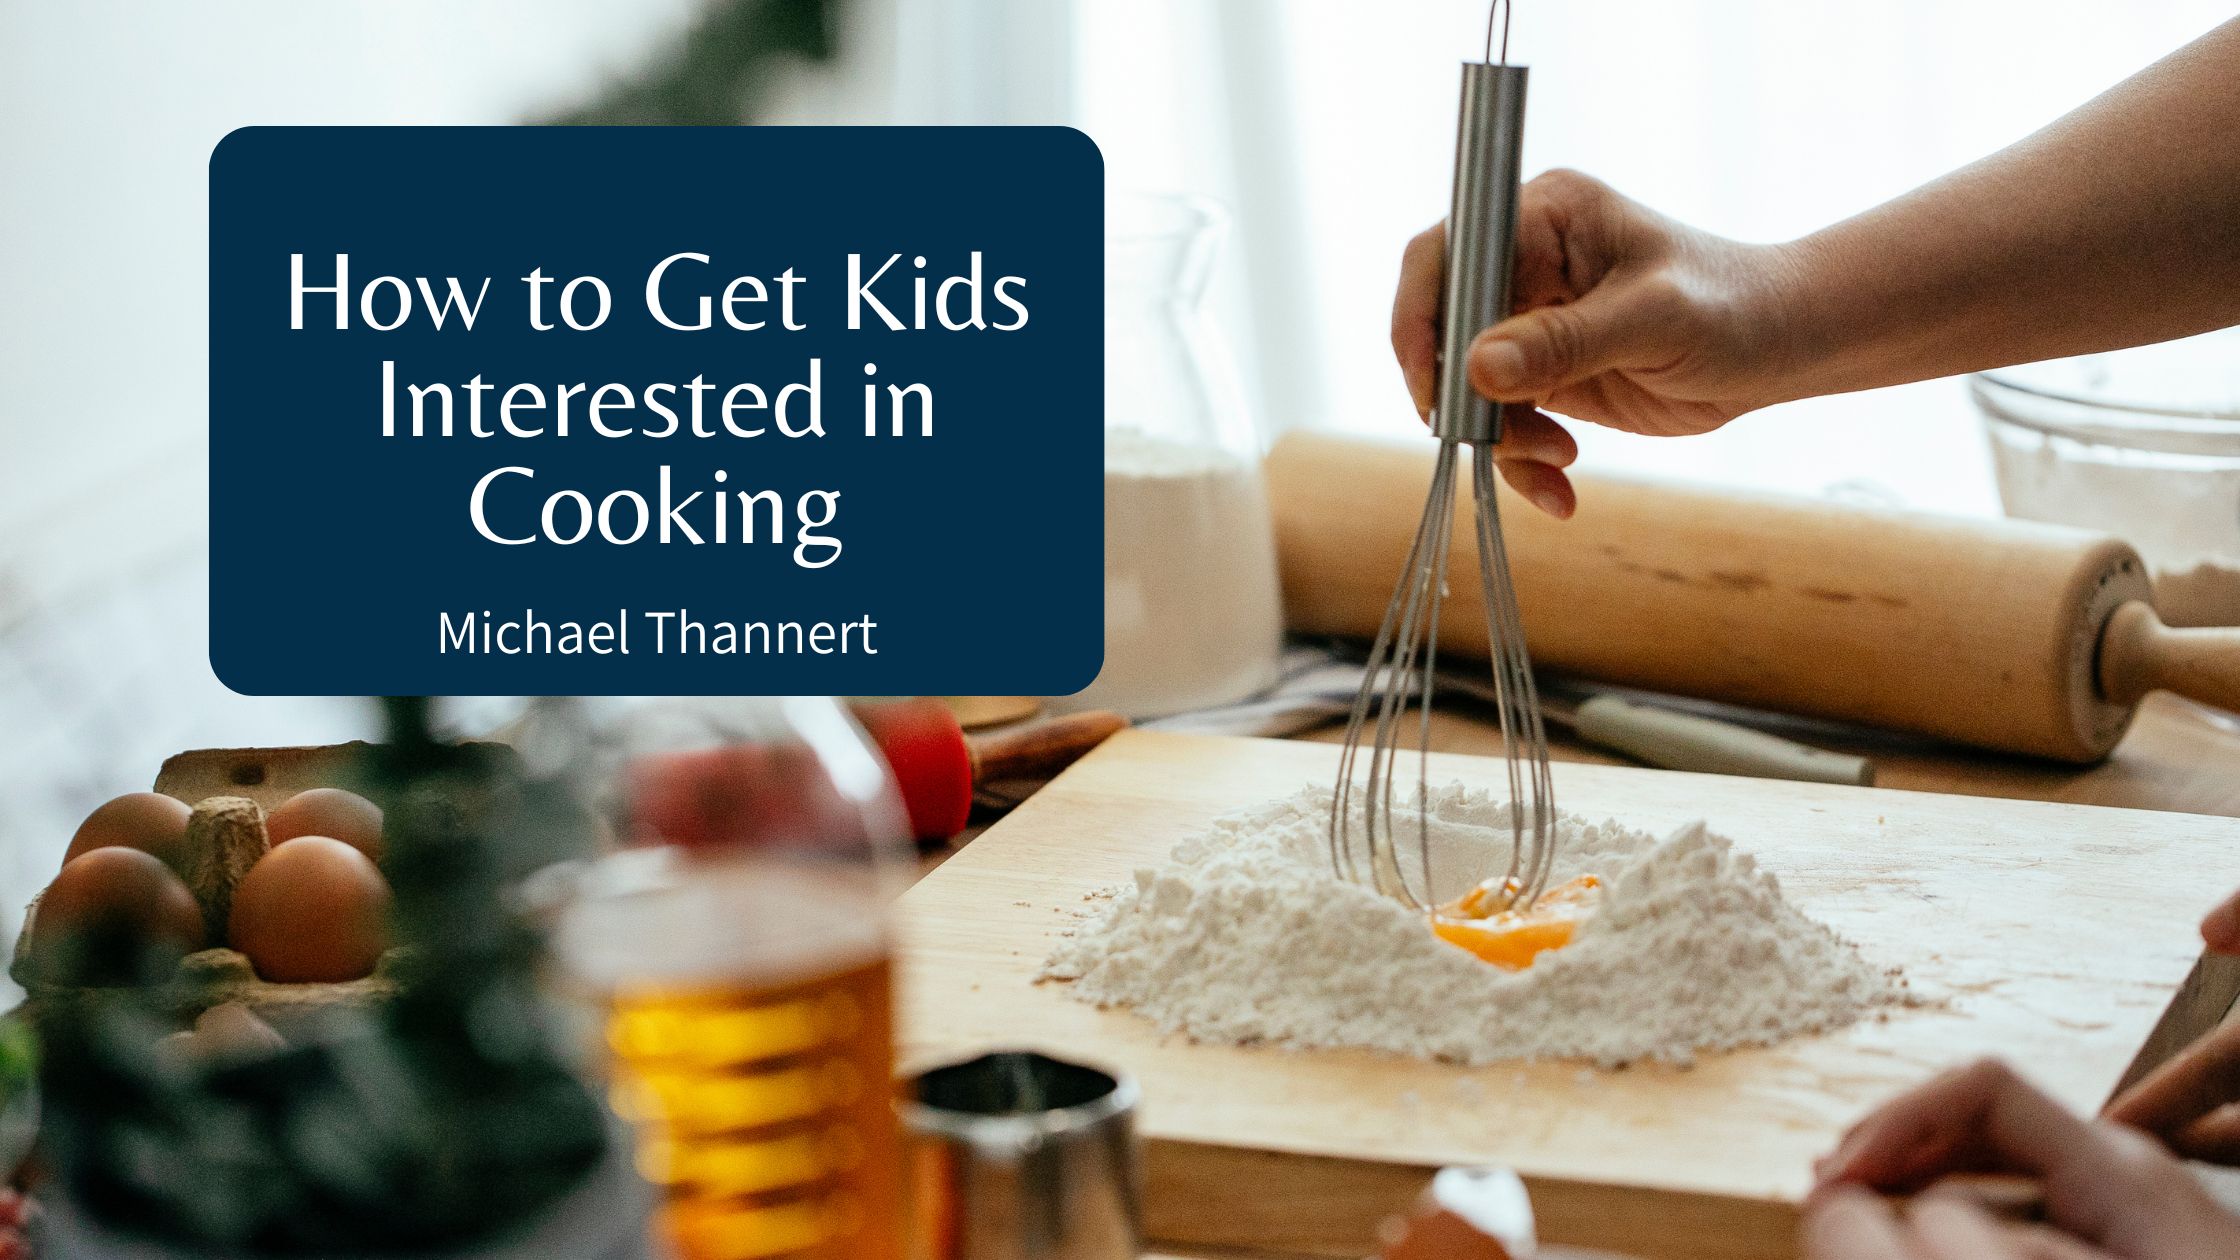 Michael Thannert - How to Get Kids Interested in Cooking